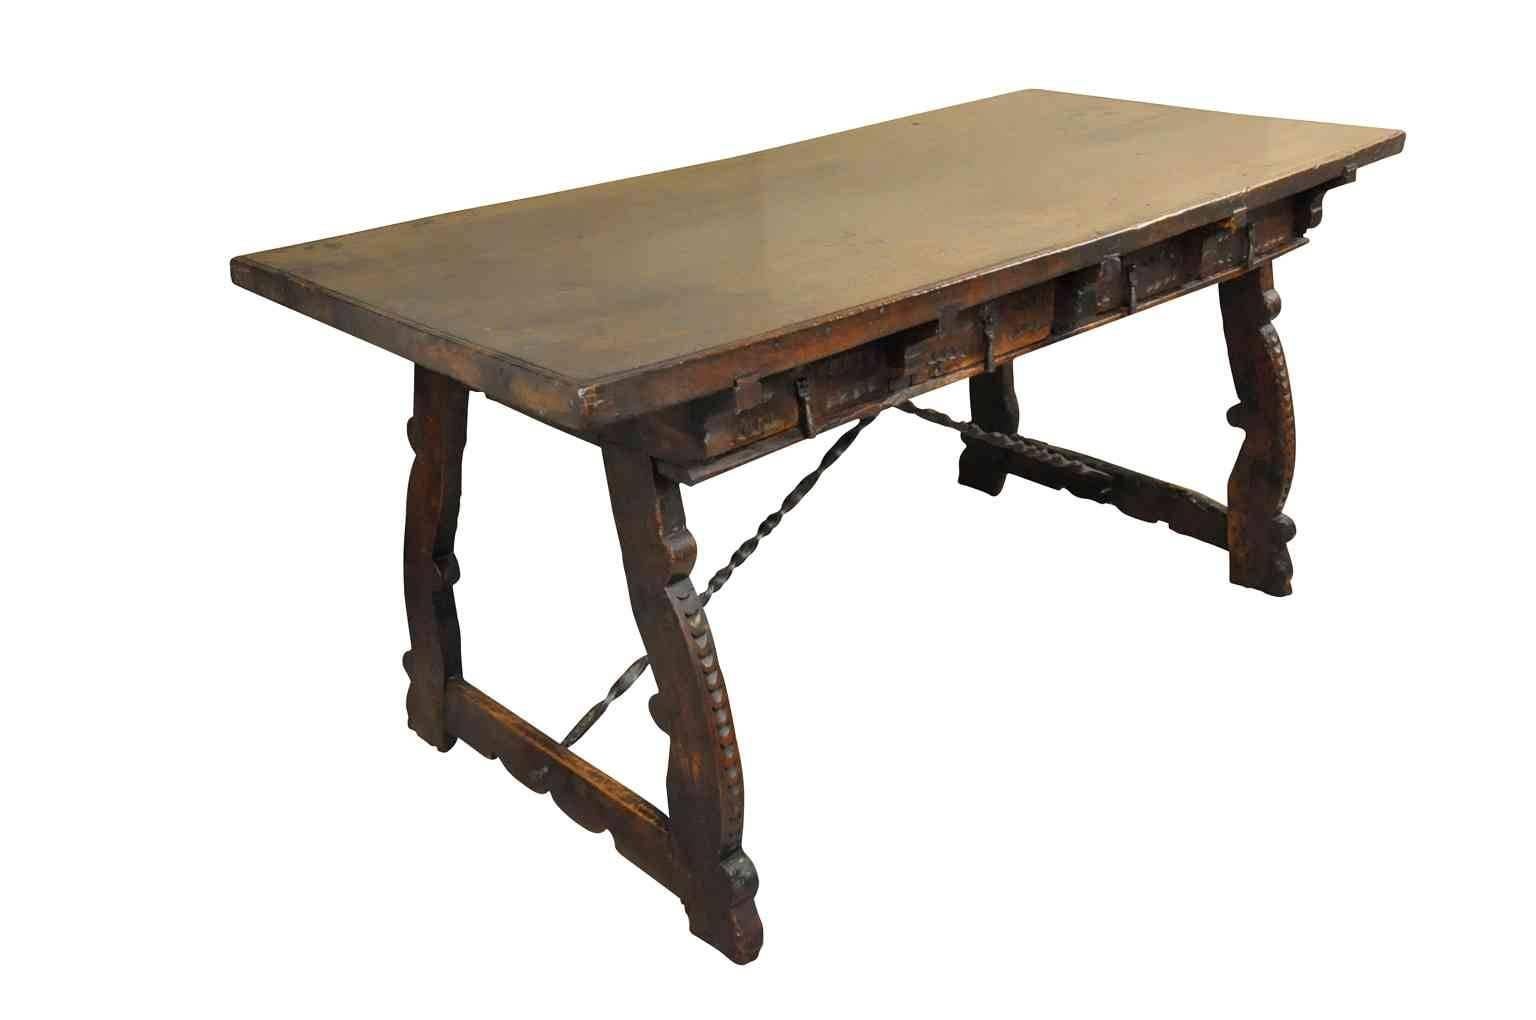 An outstanding 17th century table or desk from the Catalan region of Spain. Masterfully constructed in walnut with hand-forged iron stretchers. The patina and graining are exceptional rich and luminous. Stunning.